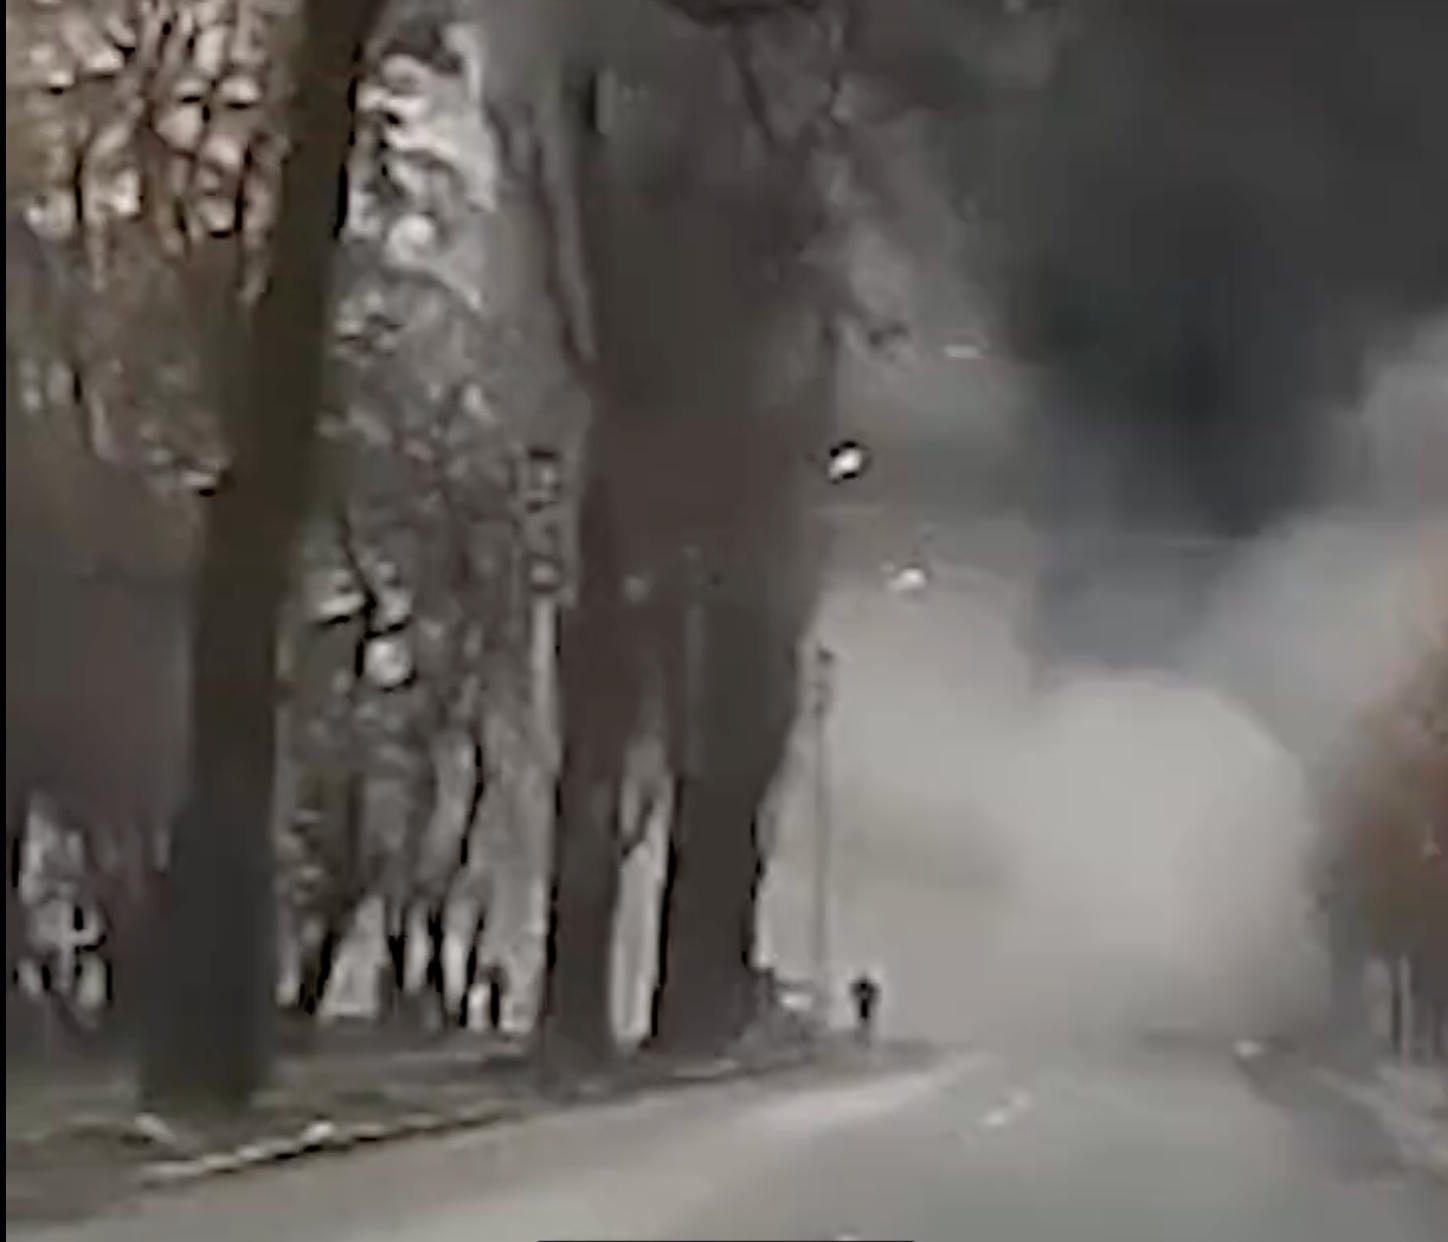 People can be seen running away from the missile attack on a residential area